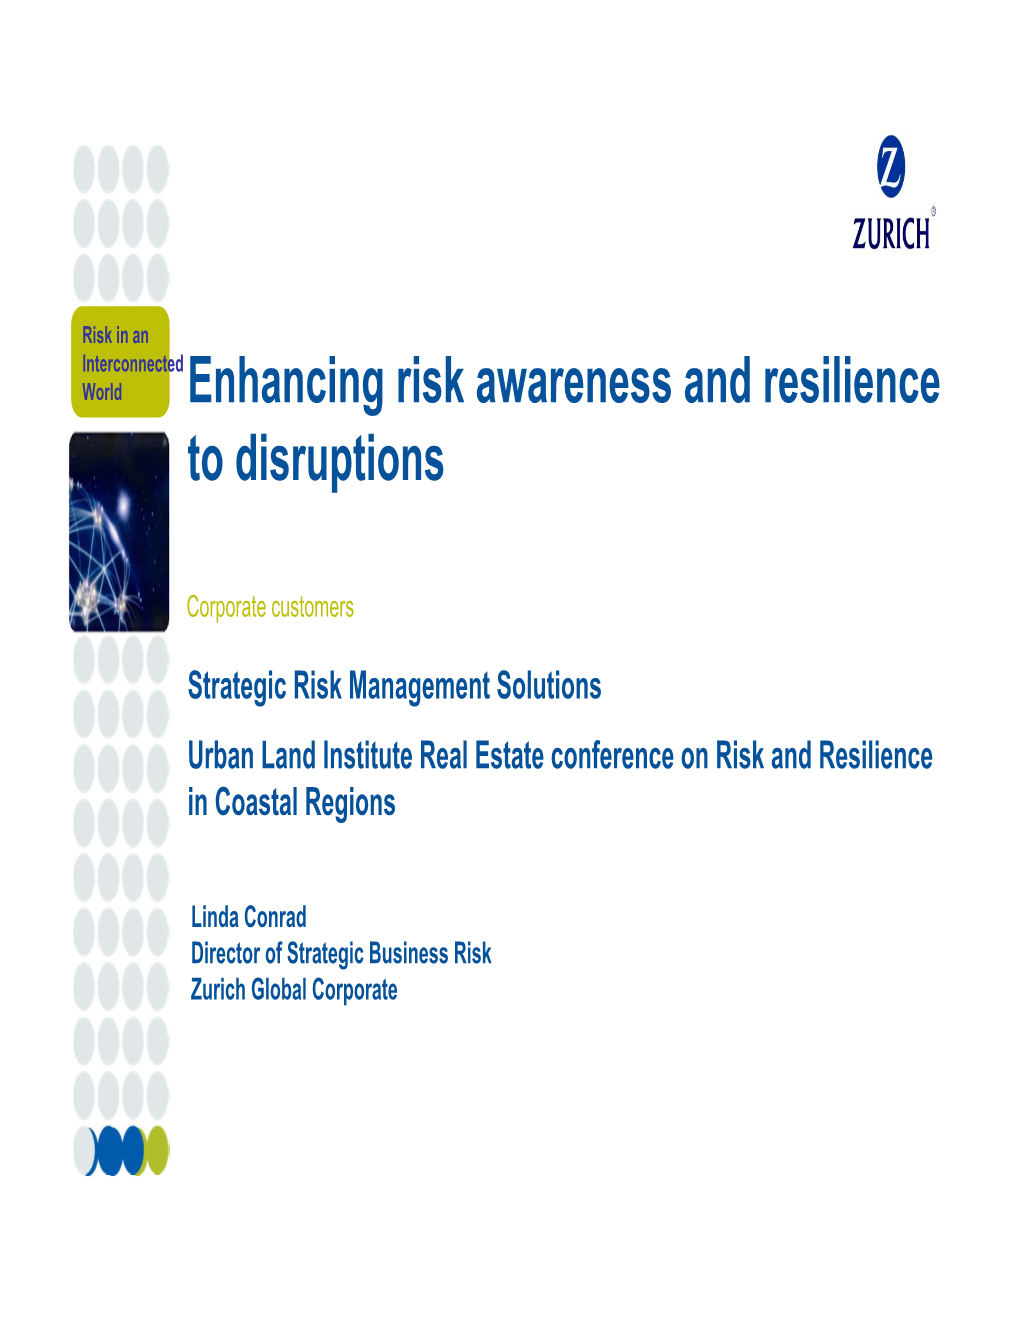 Enhancing Risk Awareness and Resilience to Disruptions